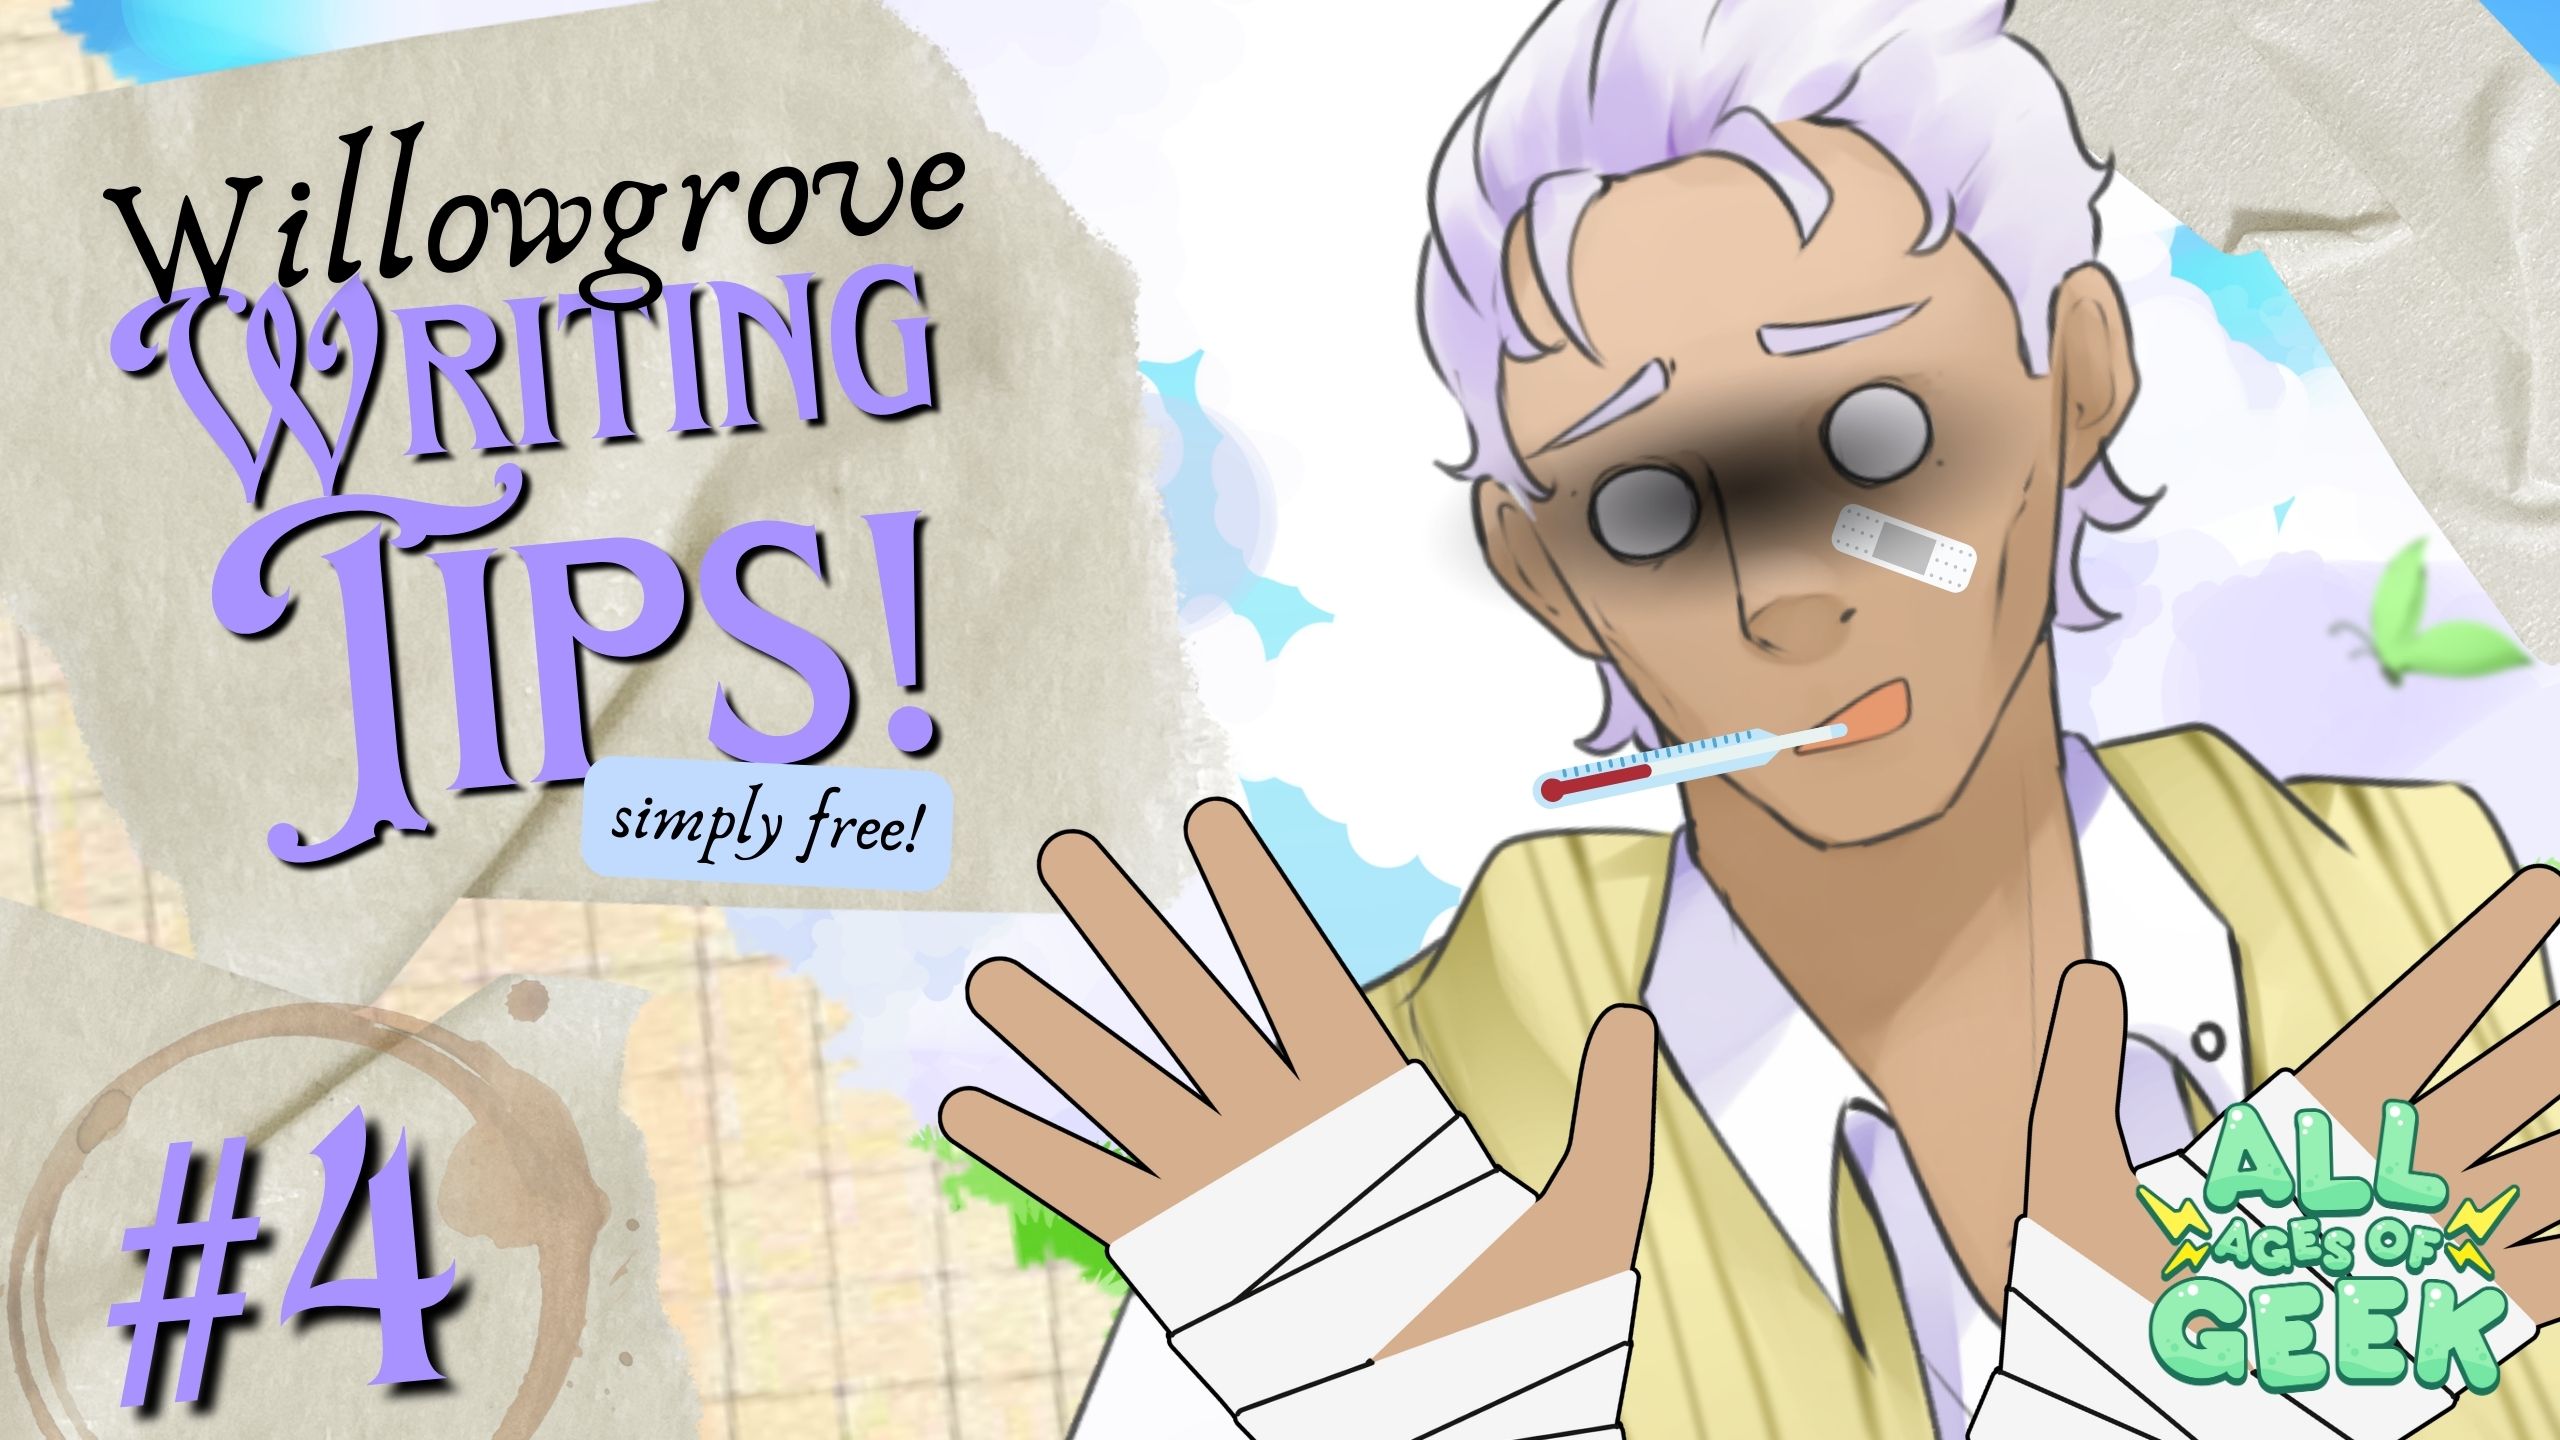 A colorful promotional image for the 'Willowgrove Writing Tips' series by All Ages of Geek. The left side of the image features the series title 'Willowgrove Writing Tips!' with a subtitle 'simply free!' and the number '#4' indicating the episode number. The right side of the image shows a character with white hair, looking exhausted with dark circles under his eyes, a bandage on his face, a thermometer in his mouth, and his hands wrapped in bandages. The 'All Ages of Geek' logo is in the bottom right corner. The overall design is vibrant and engaging, blending elements of humor and creativity.